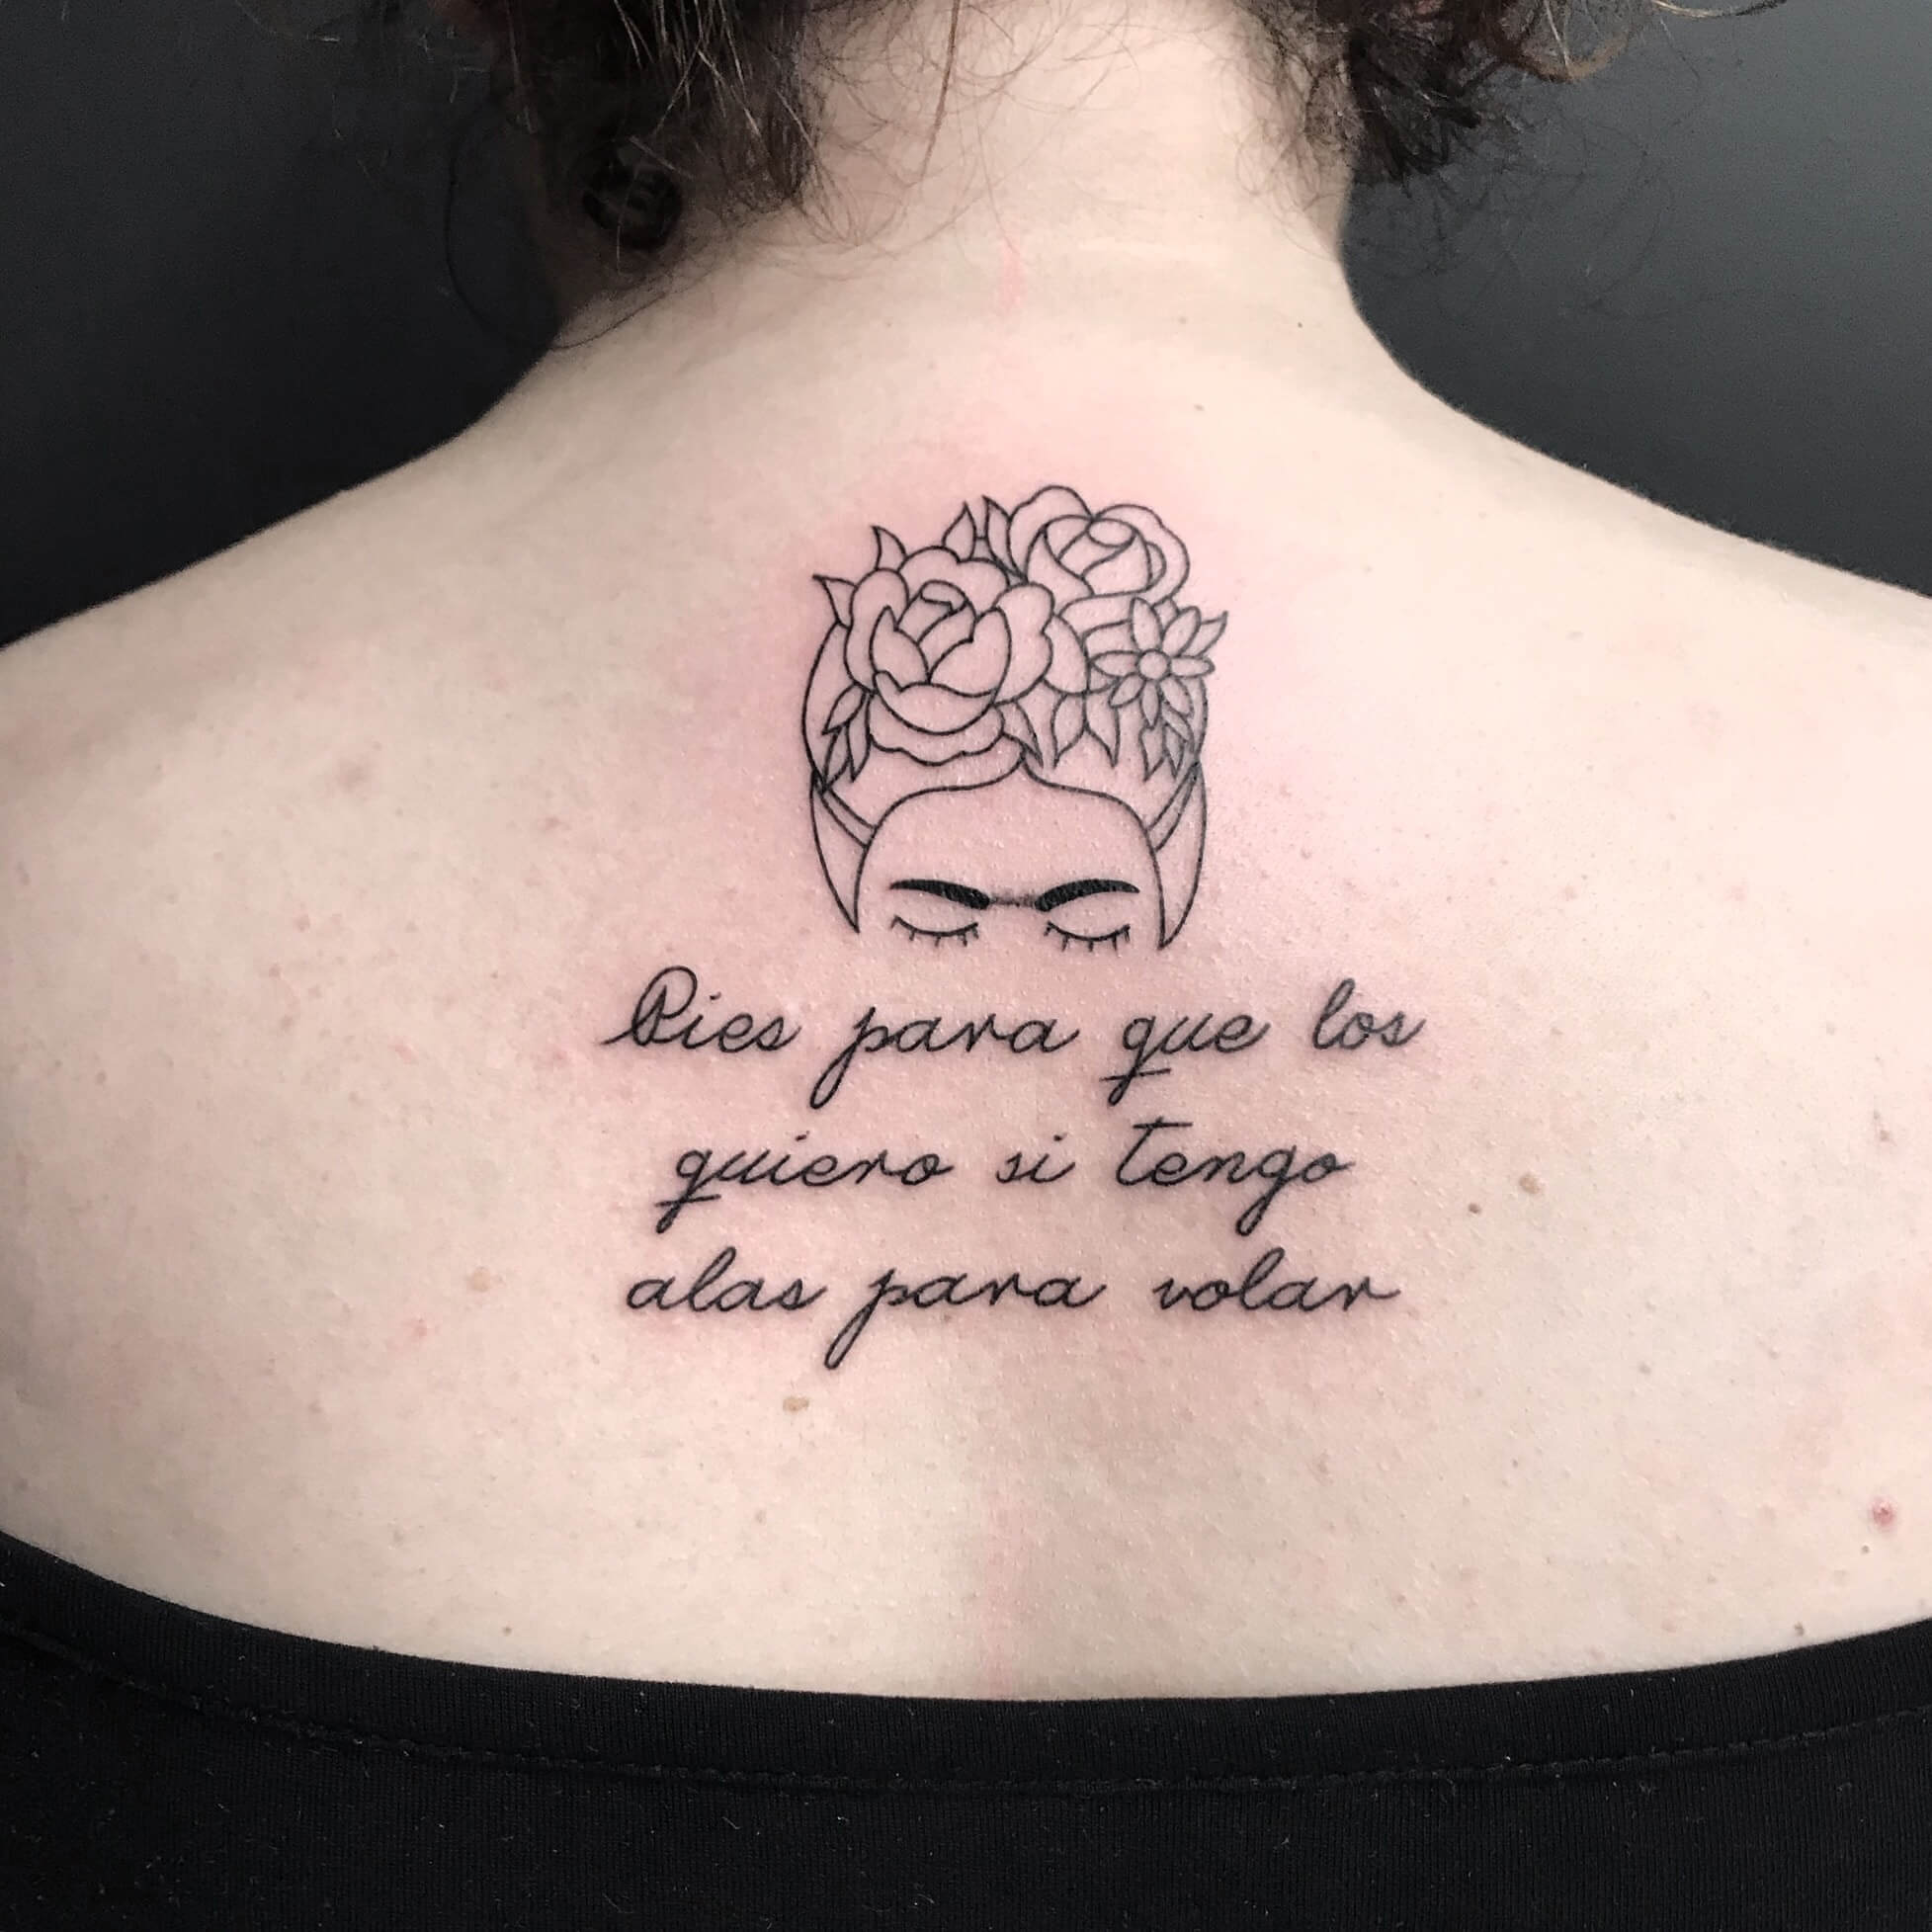 Frida Kahlo Tattoo Quotes 8 1 80+ Famous Frida Kahlo Tattoo Designs (Inspirational, Meaningful And Meaningless)